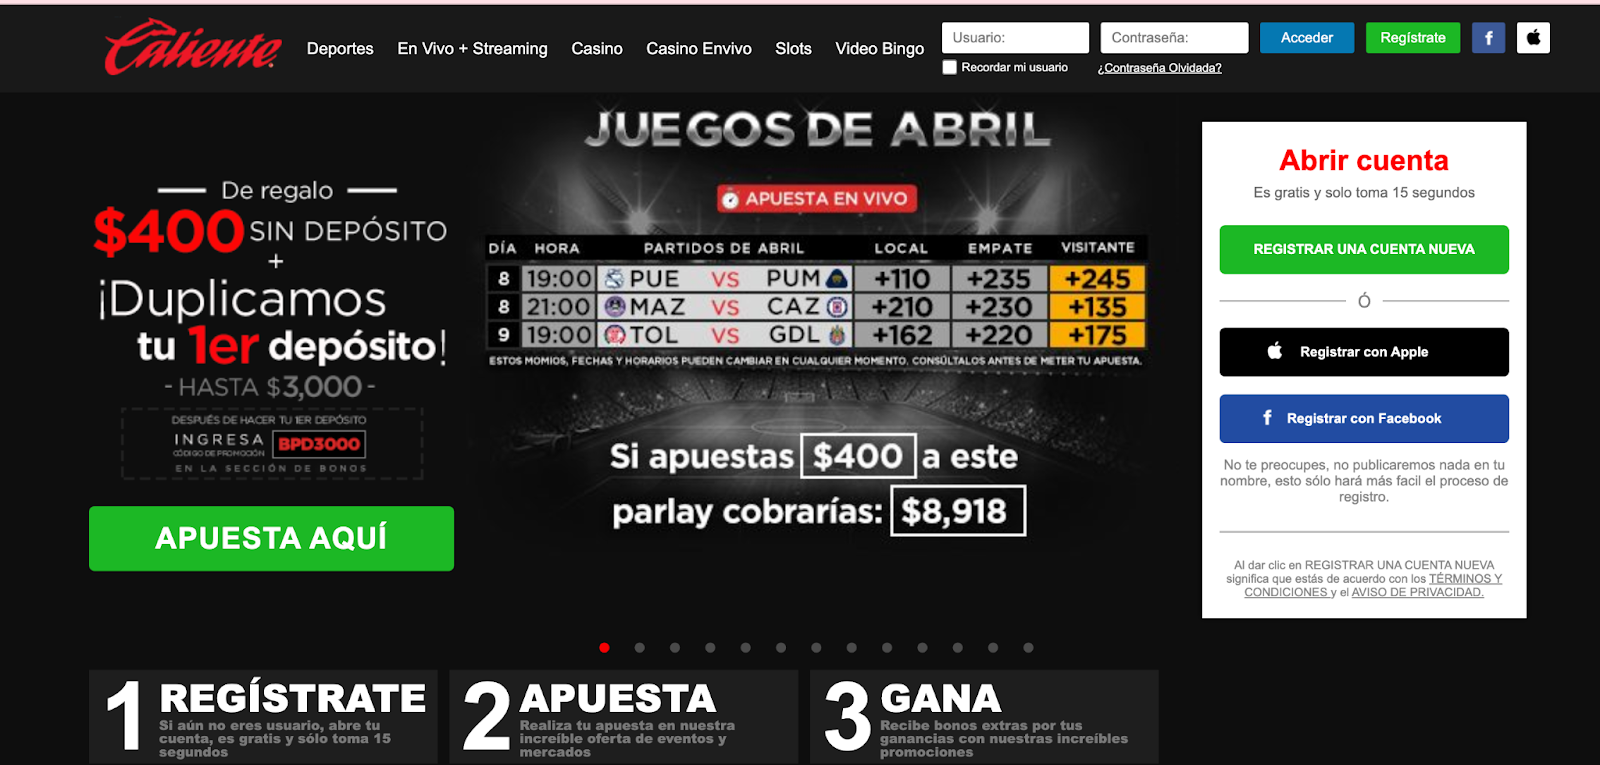 Image of Caliente  mexico homepage showing login and register features